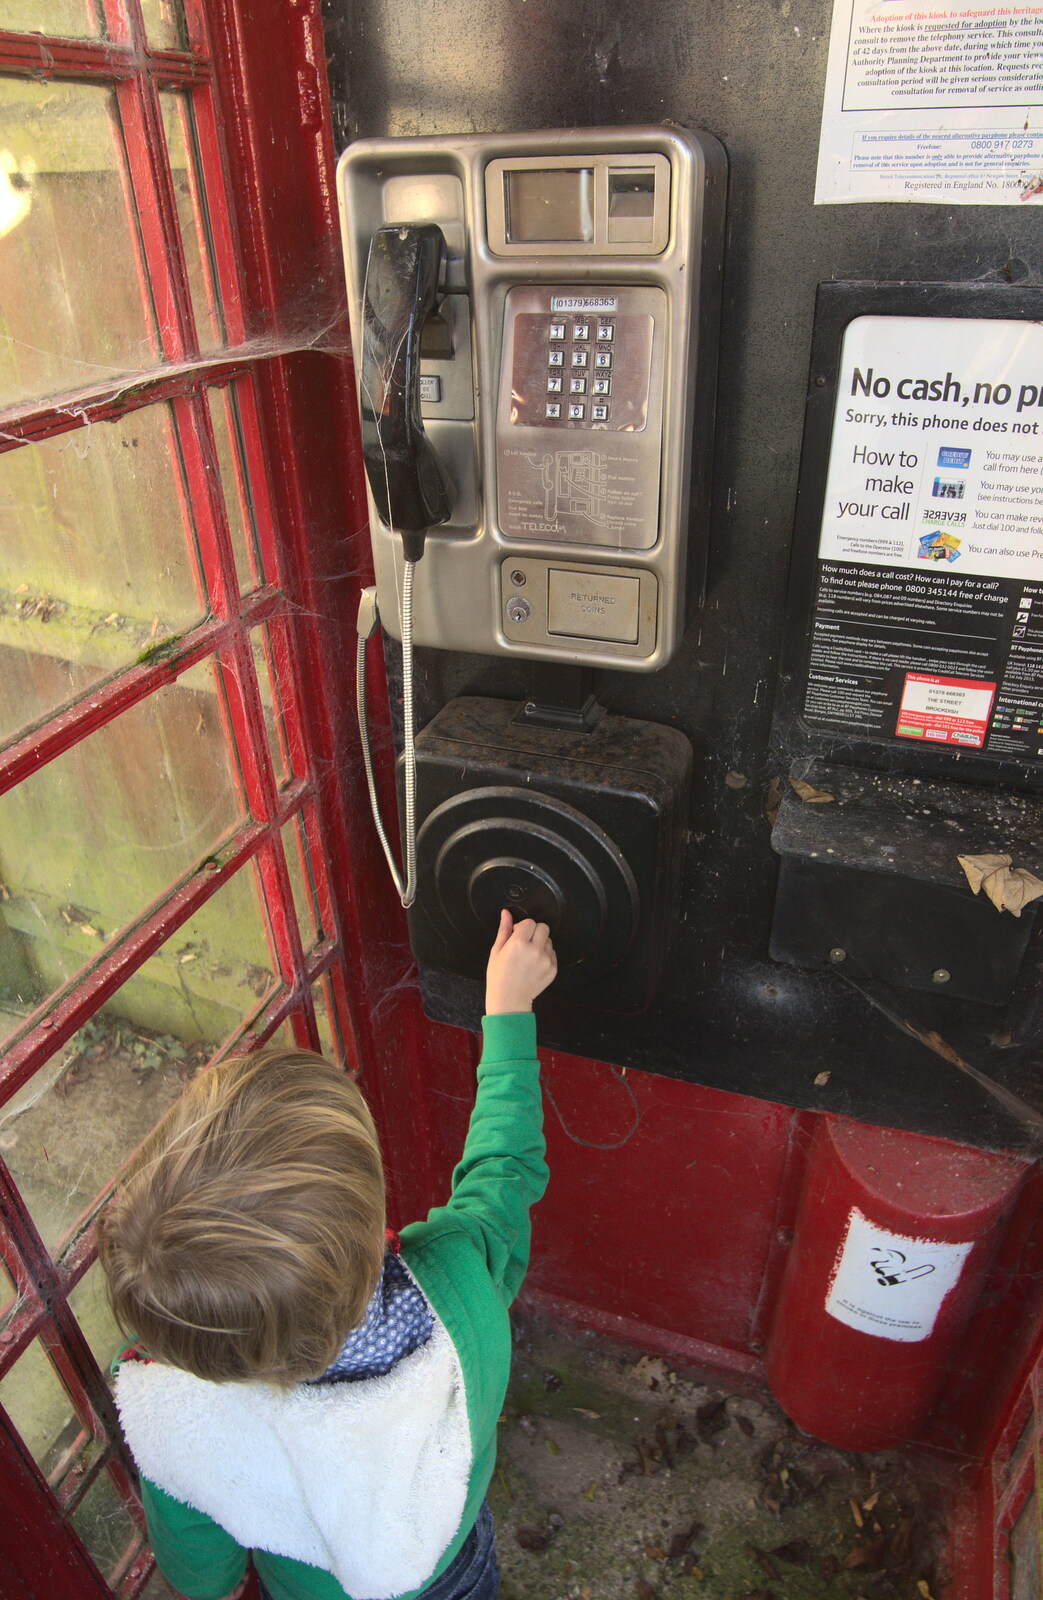 Jack's Birthday and New Windows, Brome and Brockdish, Norfolk - 4th December 2016: Harry pokes around in the old phone box